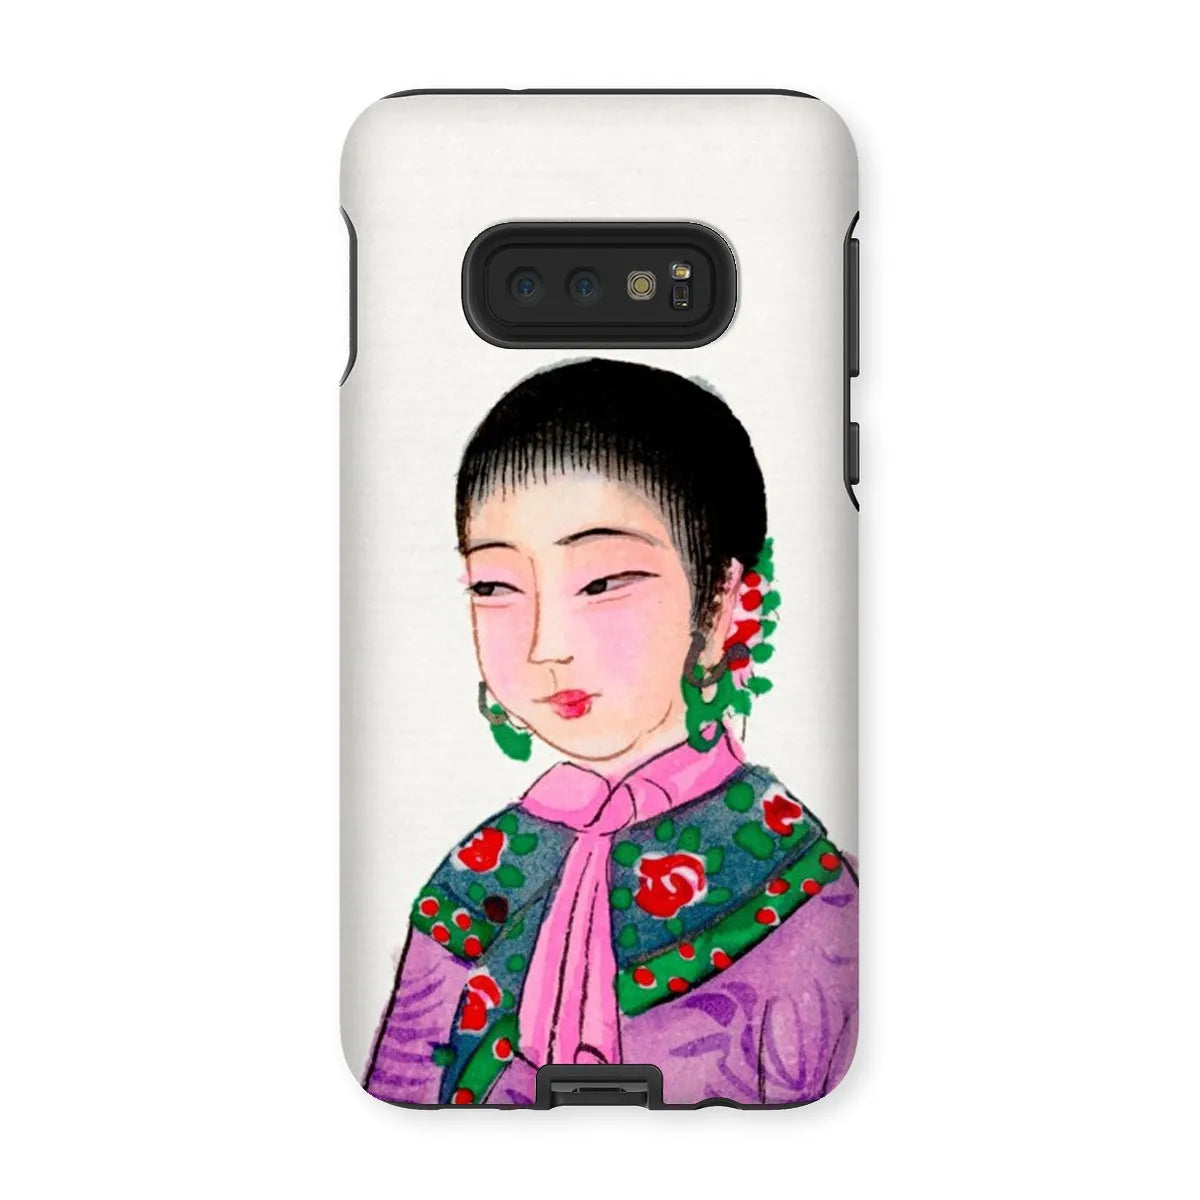 Manchu Noblewoman - Chinese Aesthetic Art Phone Case - Samsung Galaxy S10e / Matte - Mobile Phone Cases - Aesthetic Art